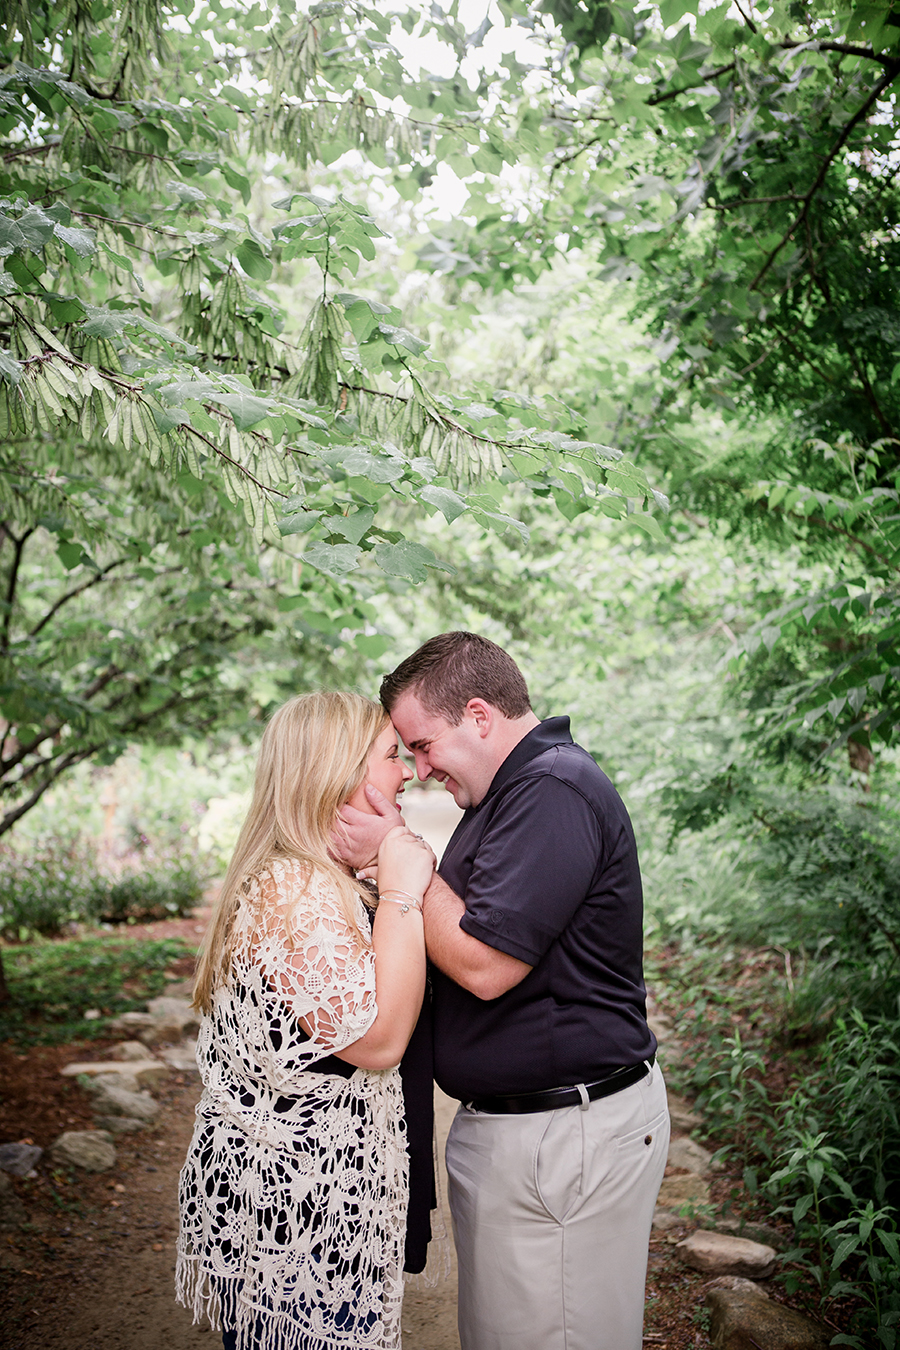 Pulling her close engagement photo by Knoxville Wedding Photographer, Amanda May Photos.